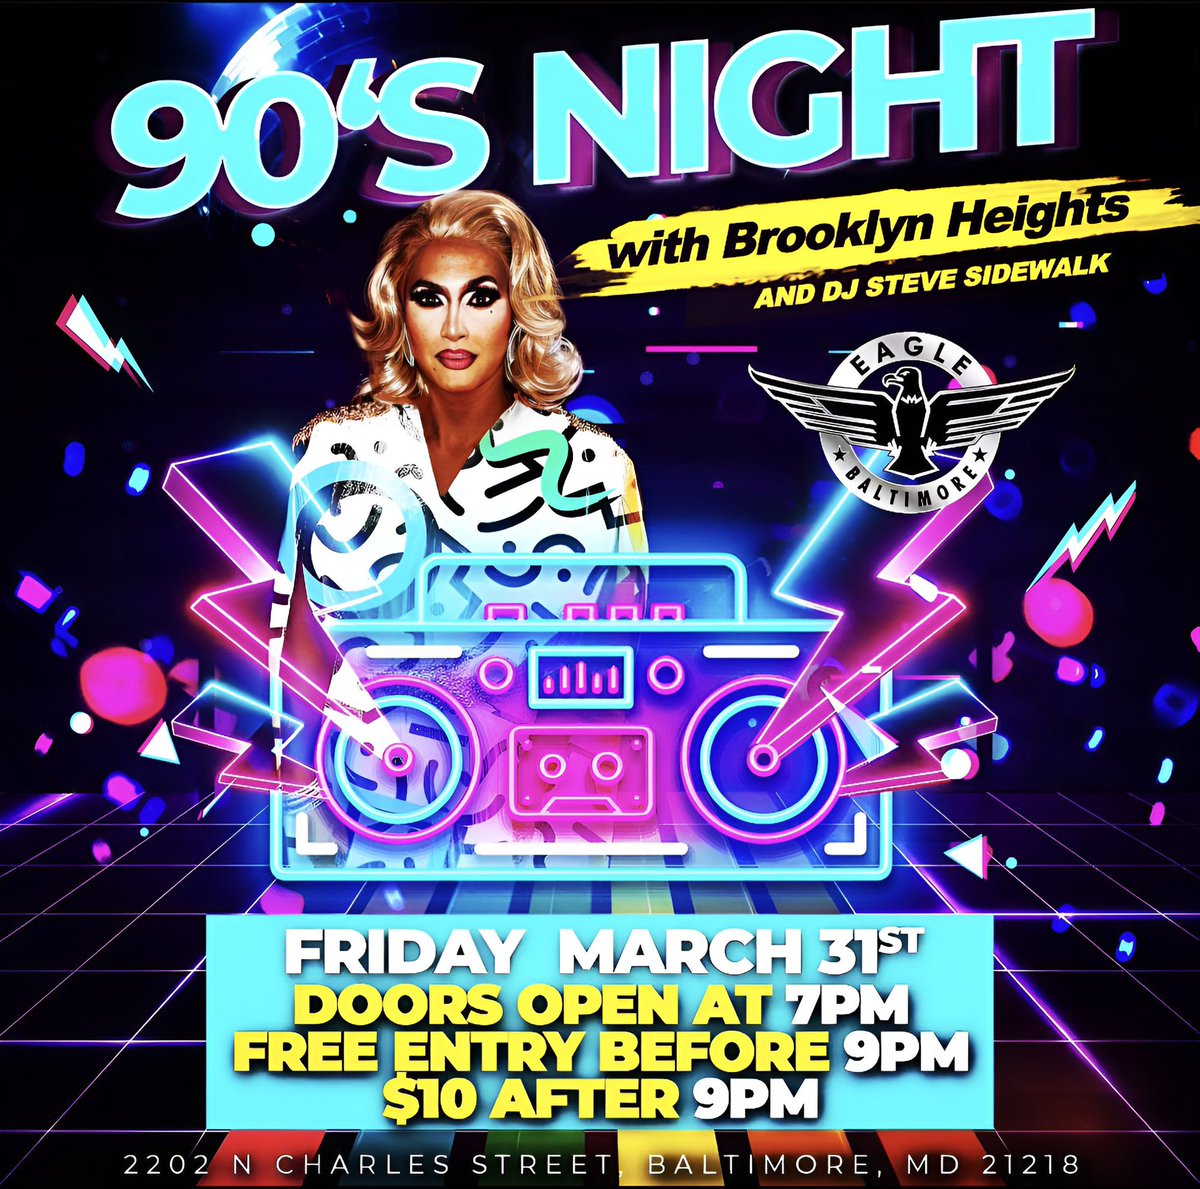 Join us for 90s Night April 1st With Brooklyn Heights with a Drag show at 11 so be sure to wear your favorite colors and clothing from the 90s as we celebrate music that defined dance music as we know it!!!! More details coming soon!!! #clublife #clubs #nightlife #baltimore